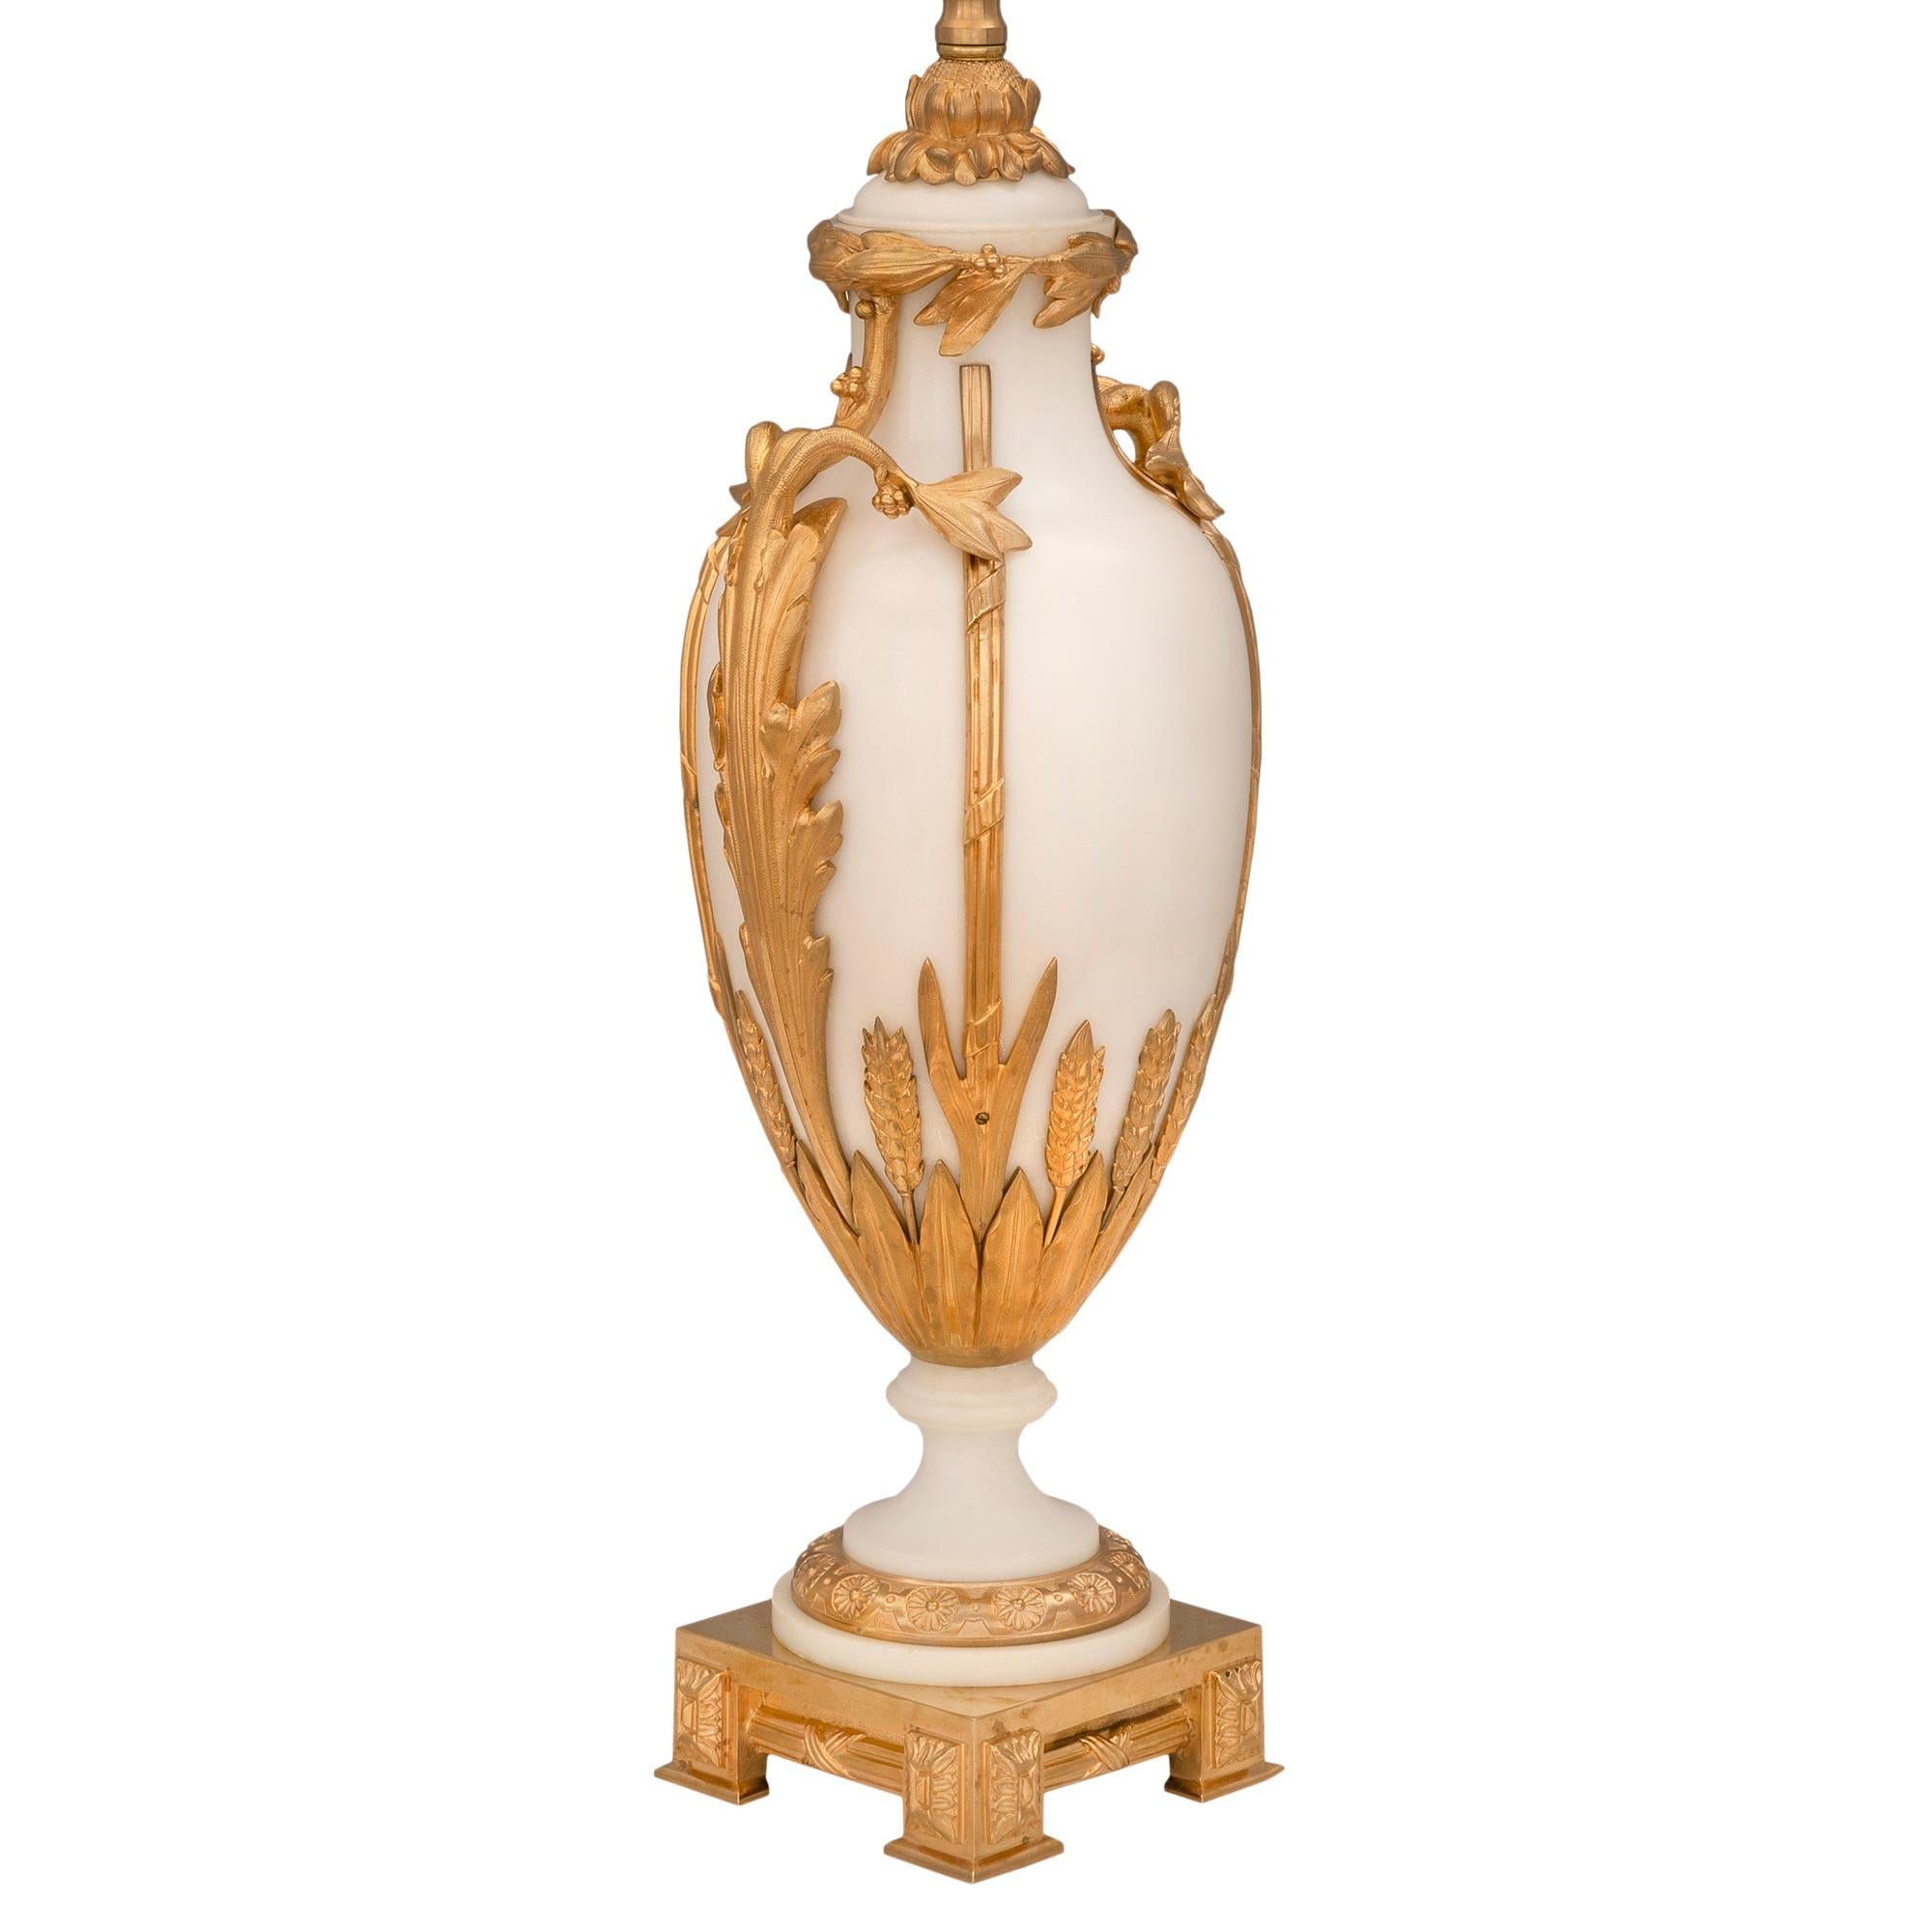 An impressive and extremely elegant pair of French 19th century Louis XVI st. white Carrara marble and ormolu lamps, attributed to A. Ermane. Each lamp is raised by a fine ormolu square base with four feet each displaying wonderful foliate block